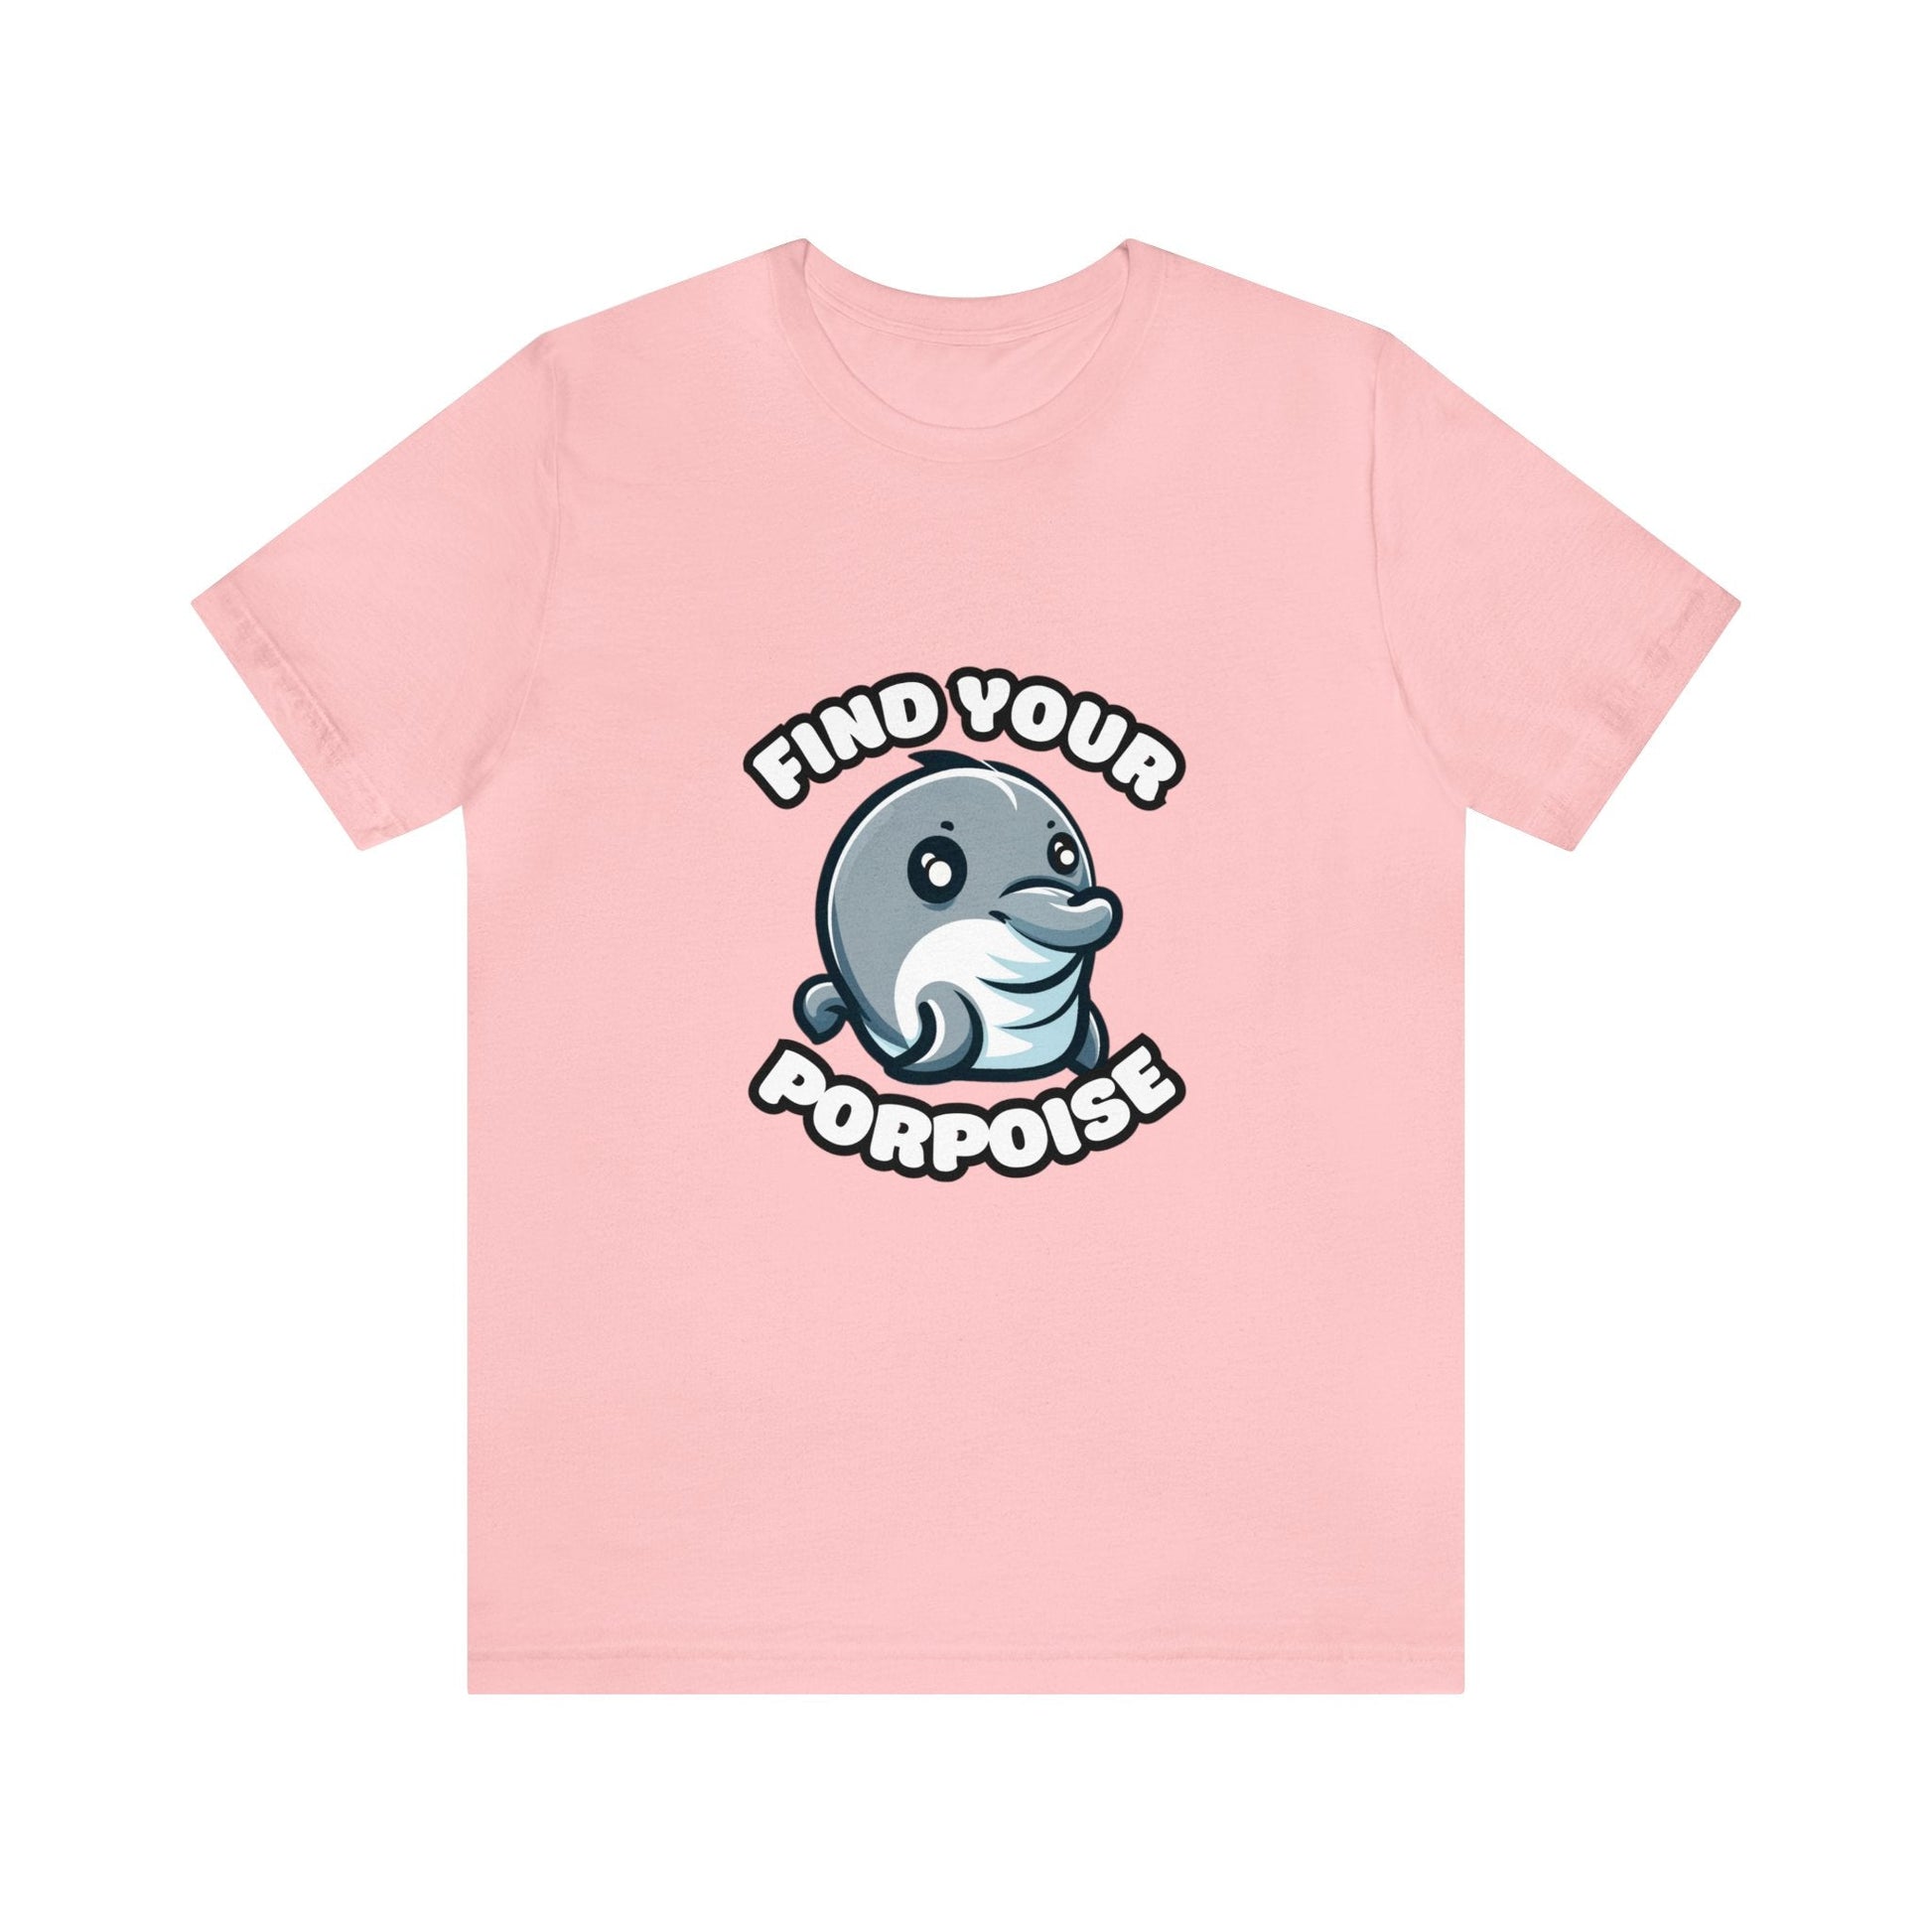 US - Find Your Porpoise - Porpoise T-shirt Pink / XS